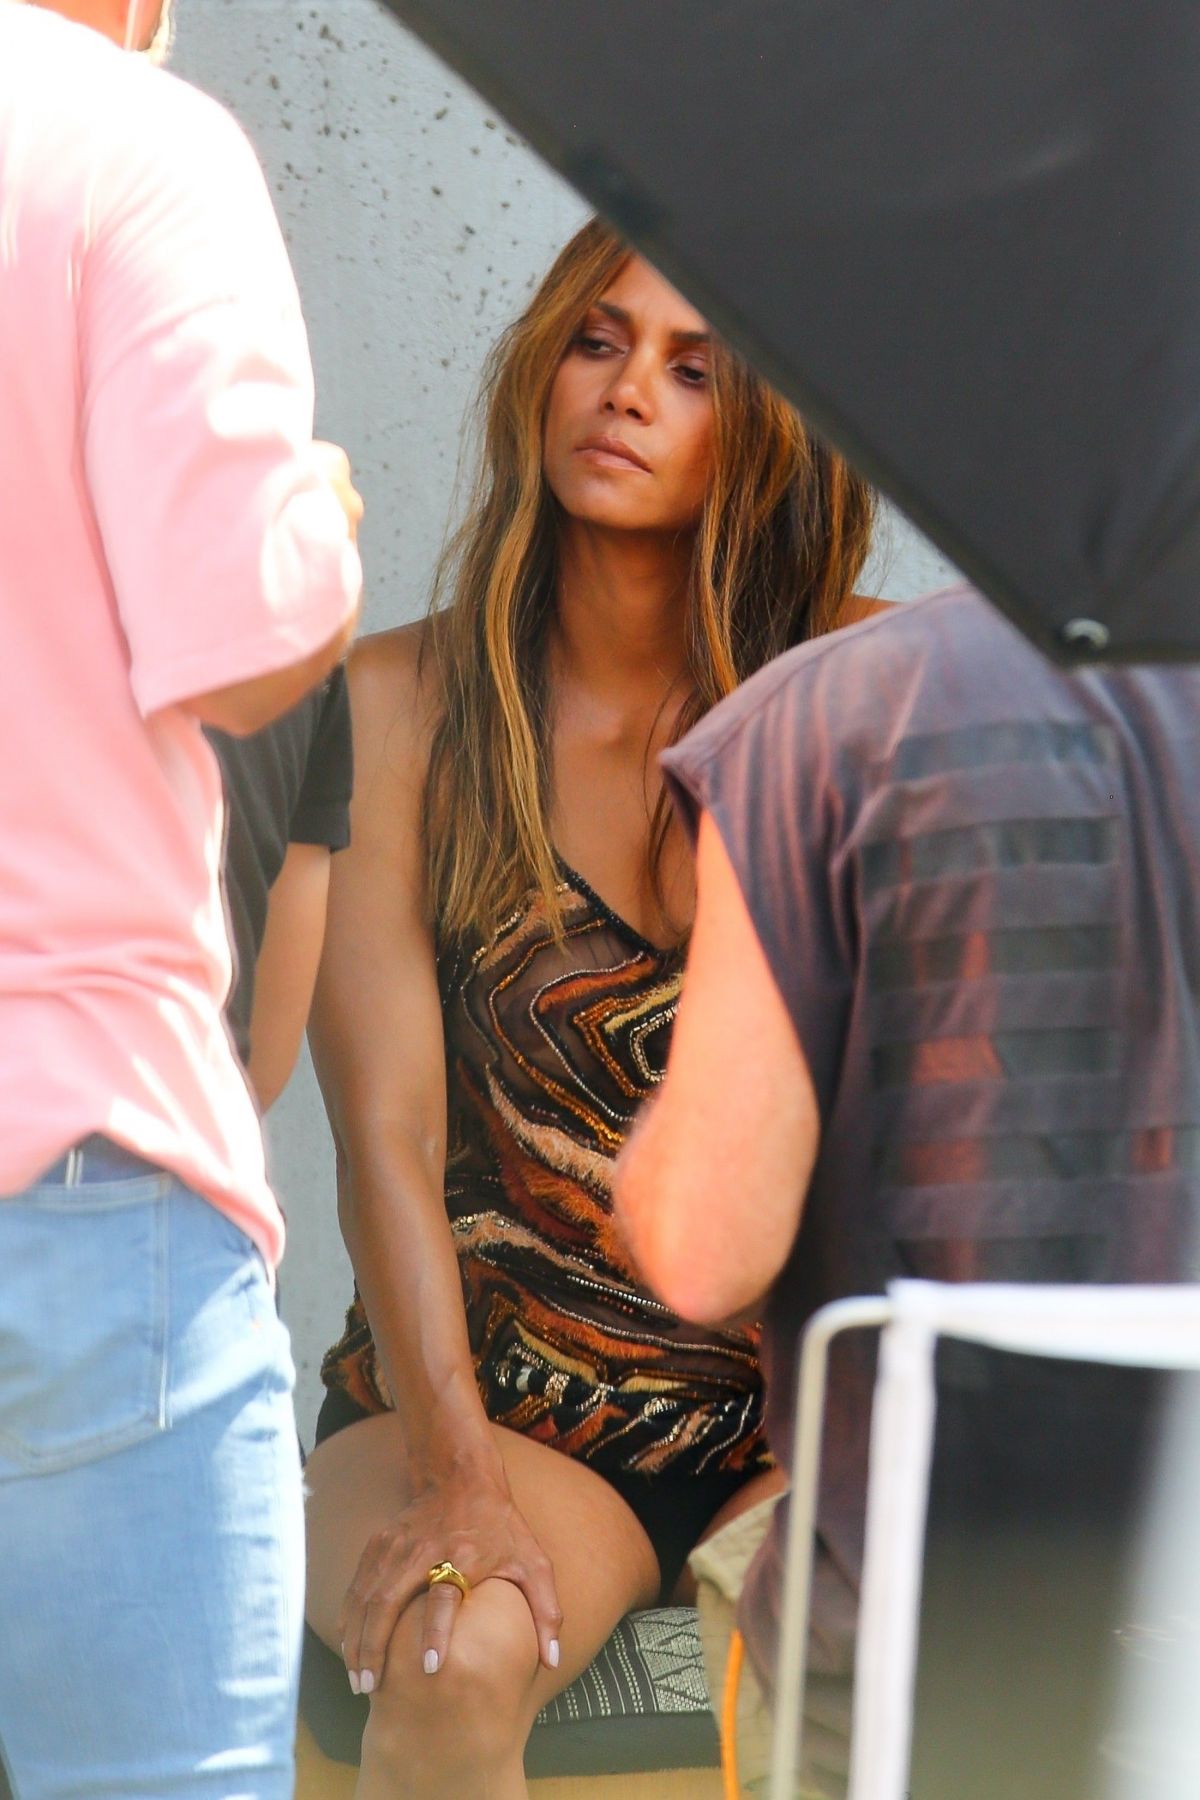 HALLE BERRY at a Photoshoot in Los Angeles 08/17/2020.